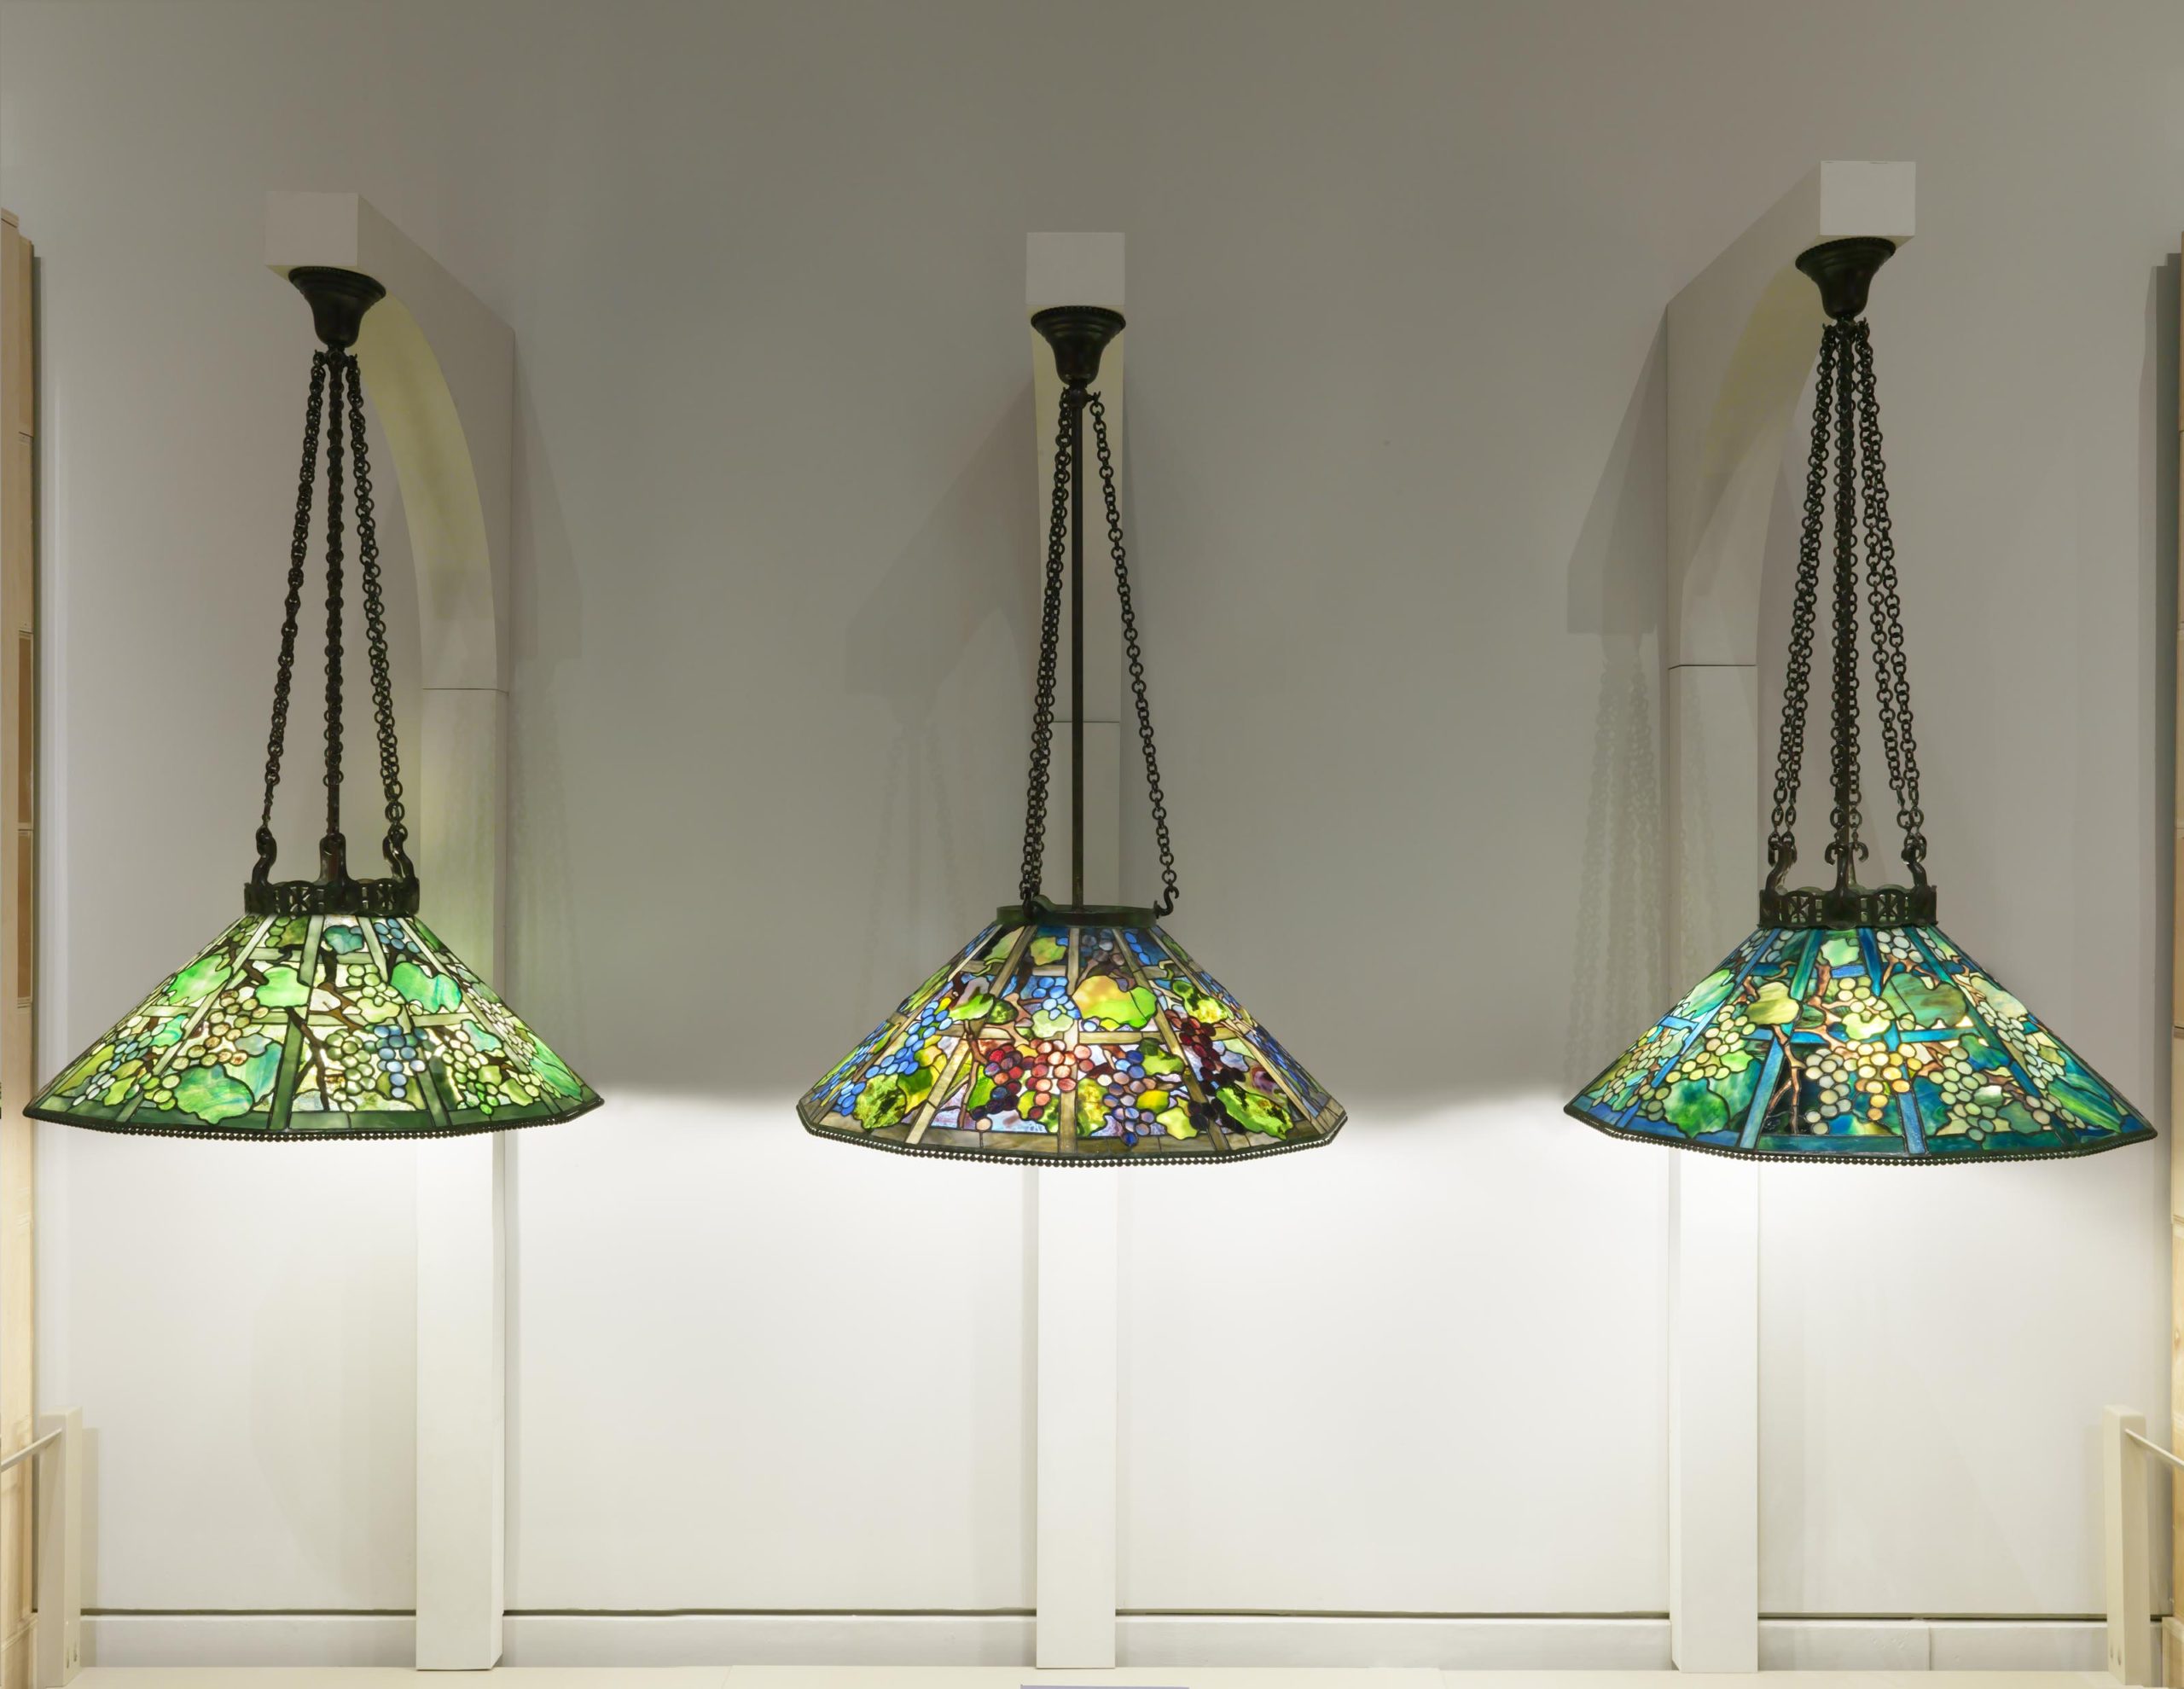 Three hanging Tiffany Glass lamps installed on an exhibition wall. Each lamp shade is hanging from a black, three-piece metal chain. The lamps are made of green, blue, and purple tones and depict grapes growing from a vine.